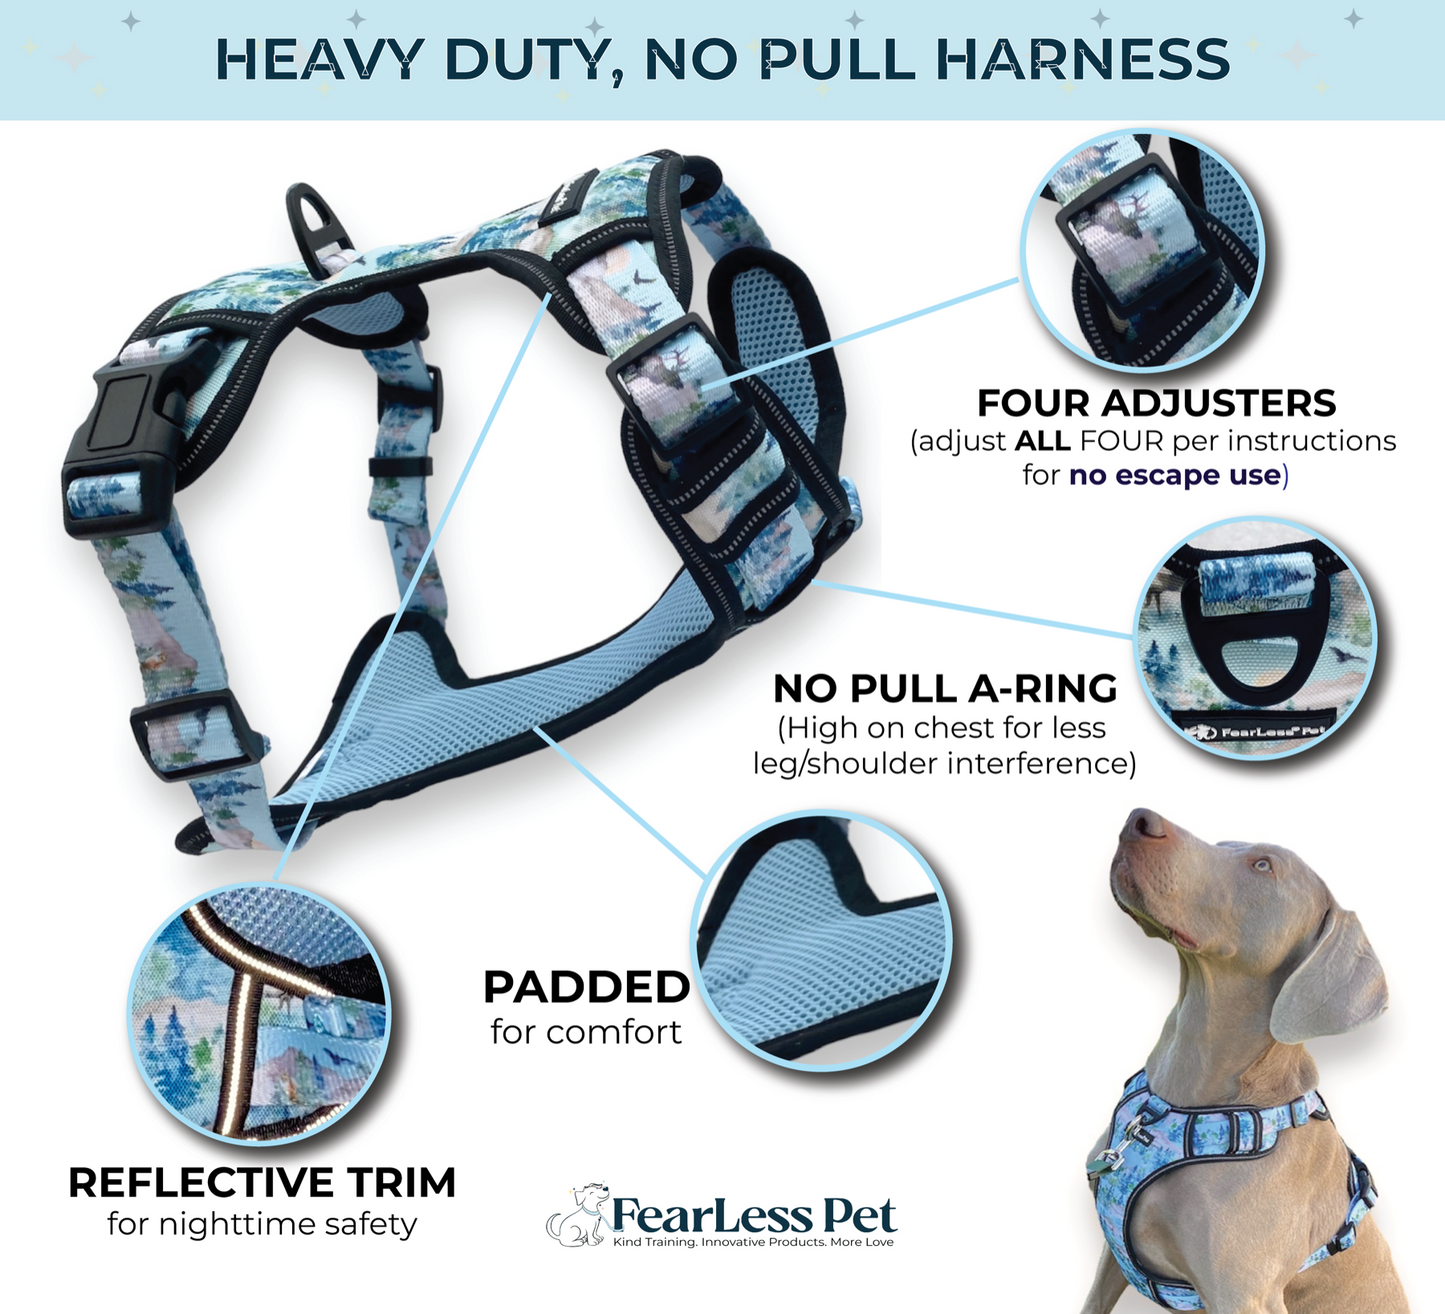 an infographic showing the features and benefits of a front clip dog harness that is also a no escape dog harness for medium and large dogs